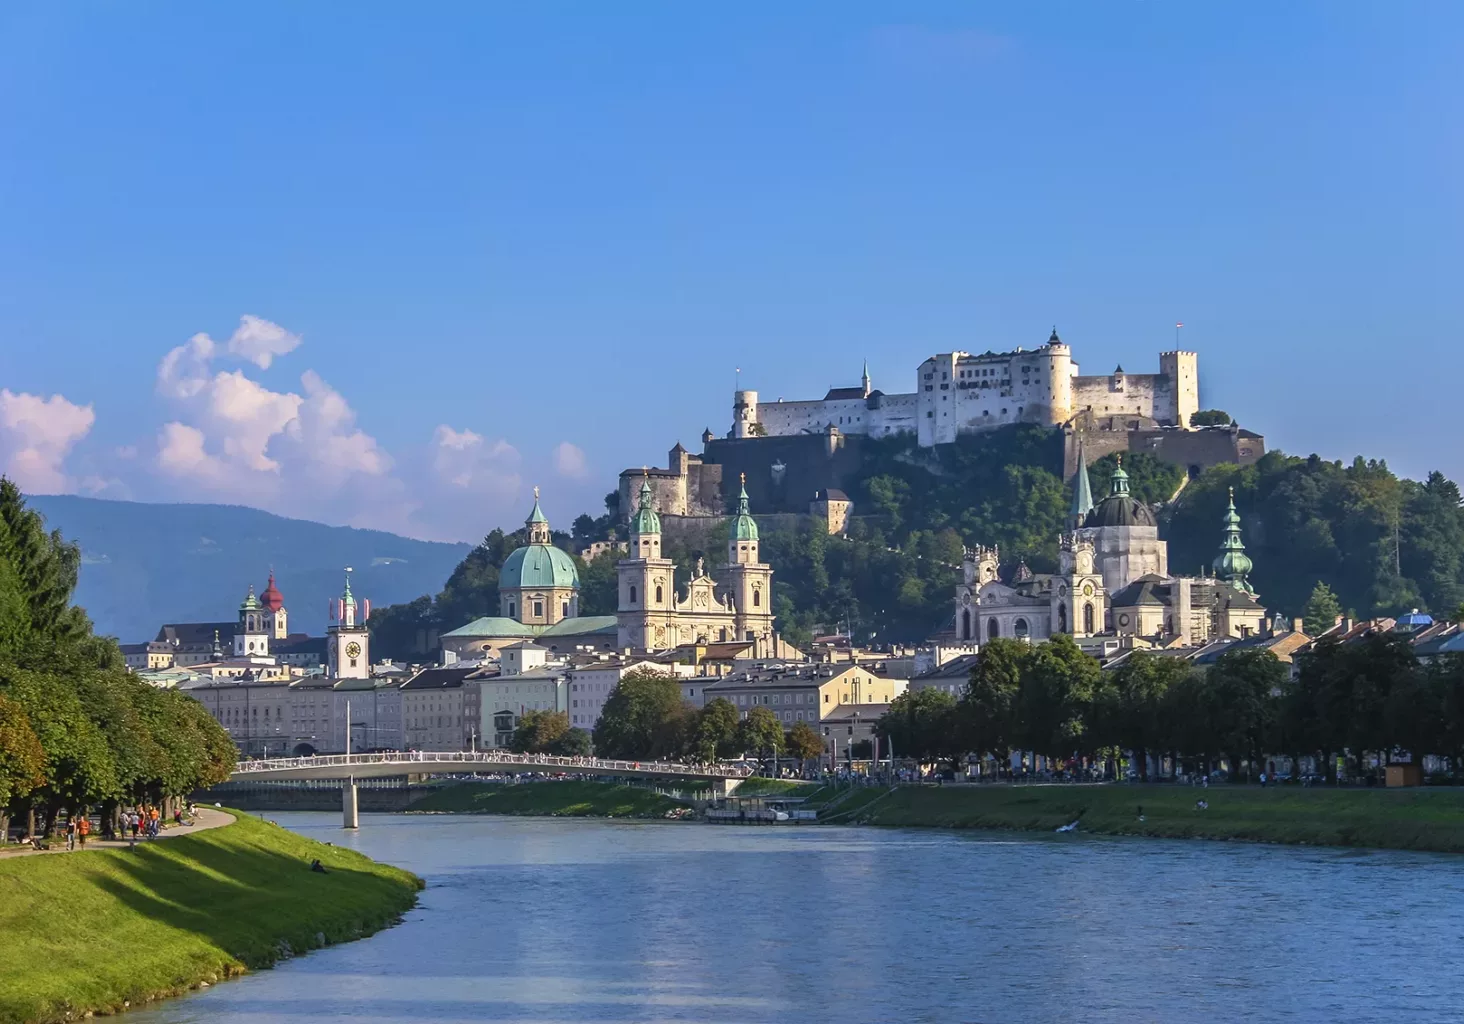 Salzburg in summer seen from one of the bridges on River Salzach. On the top of the rocky hill stands the imposing Hohensalzburg Fortress, built in 1077. The city is renowned for its baroque architecture and has been listed in UNESCO World Heritage Site in 1996. Salzburg, Austria.